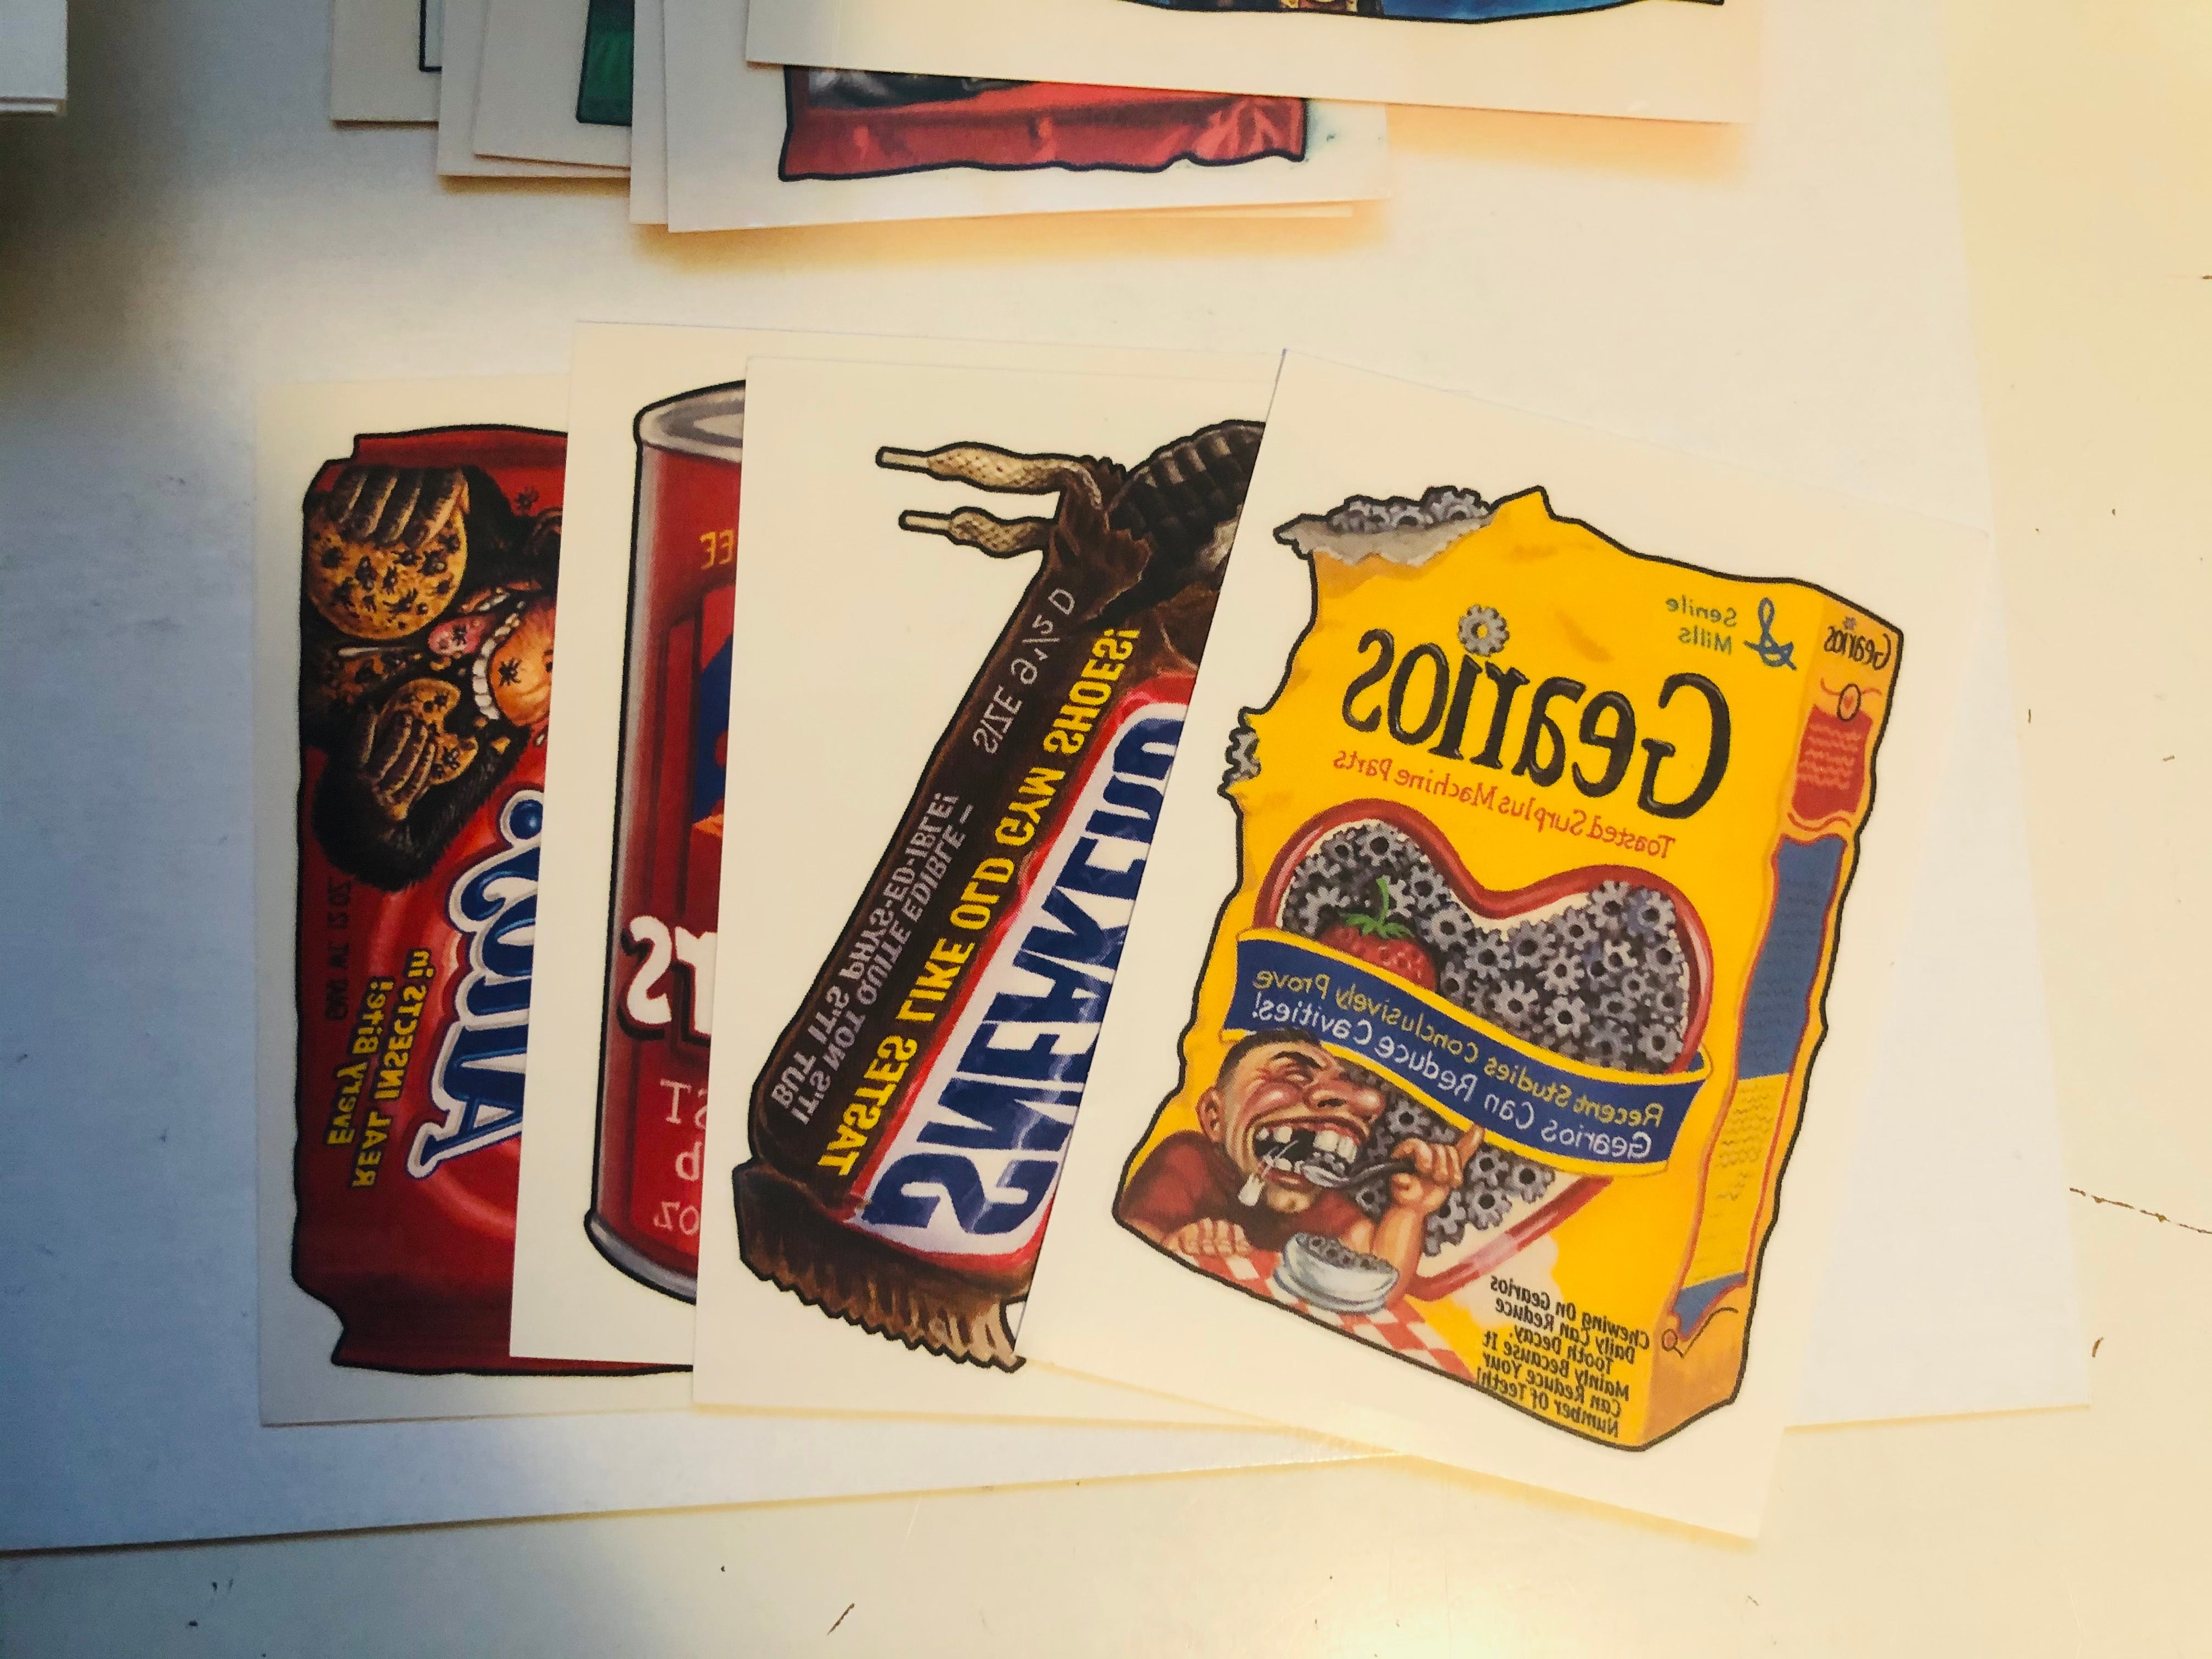 Wacky Packages stickers series 1 set with 2 insert sets 2013